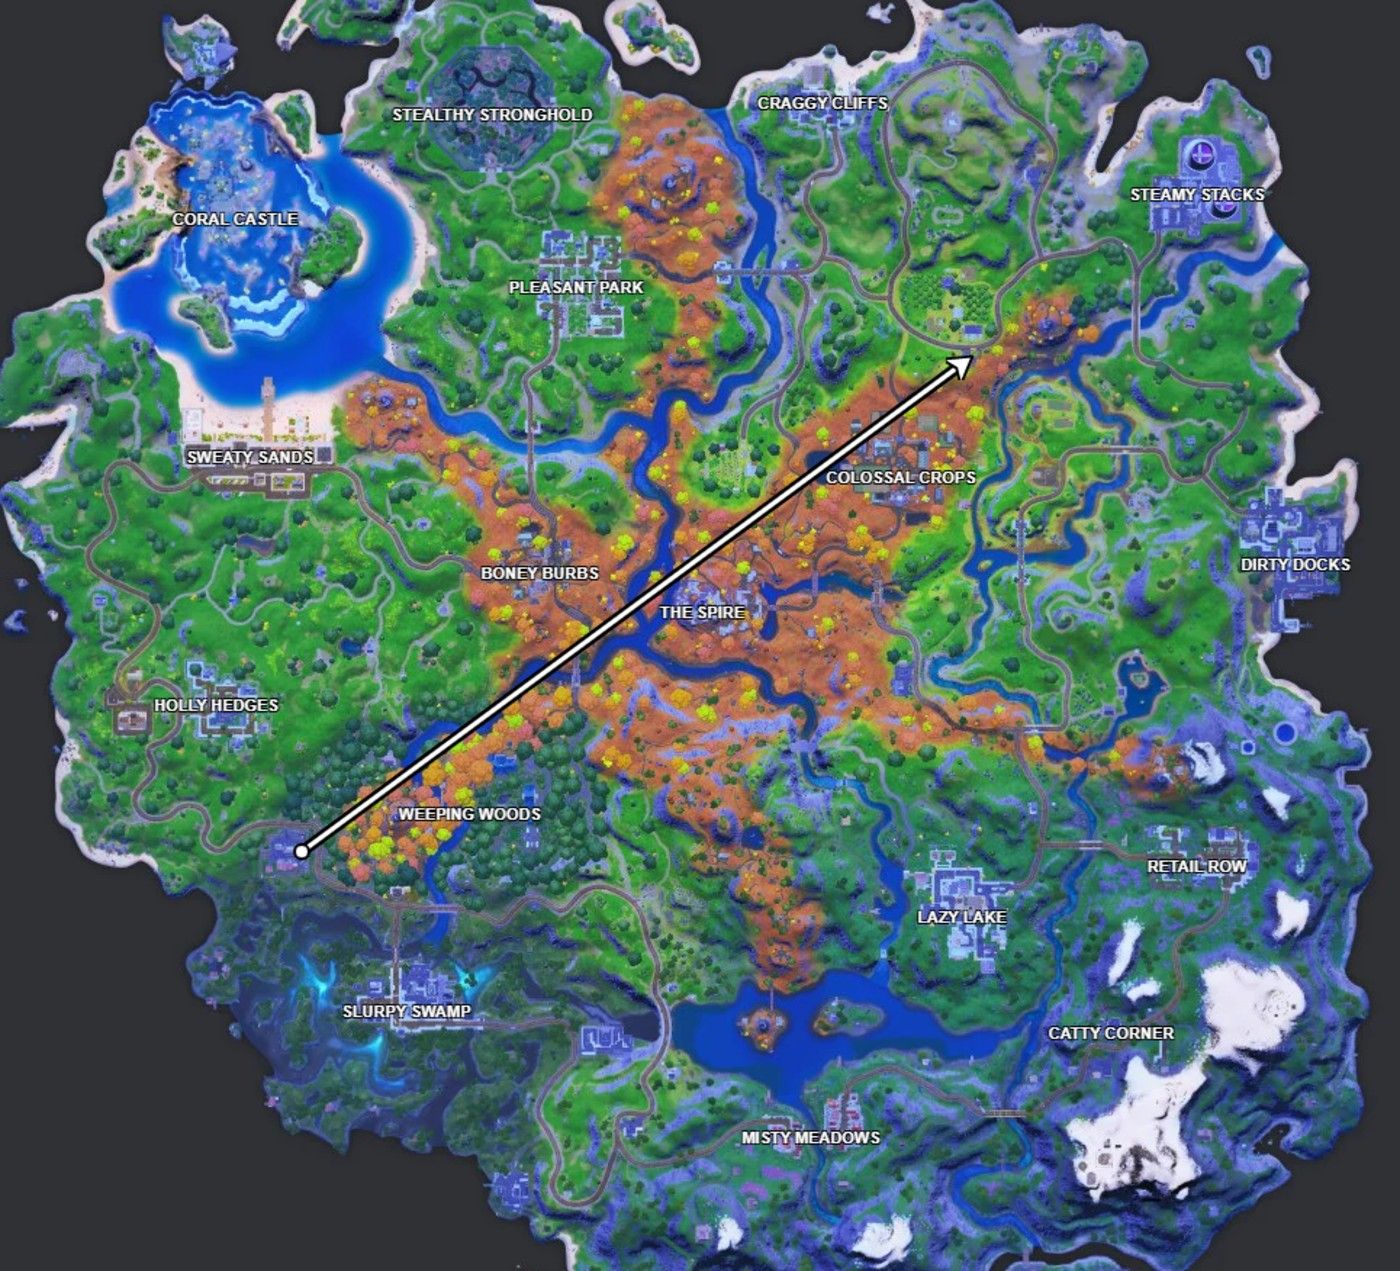 The fastest route between Durrr Burger and Pizza Pit in Fortnite